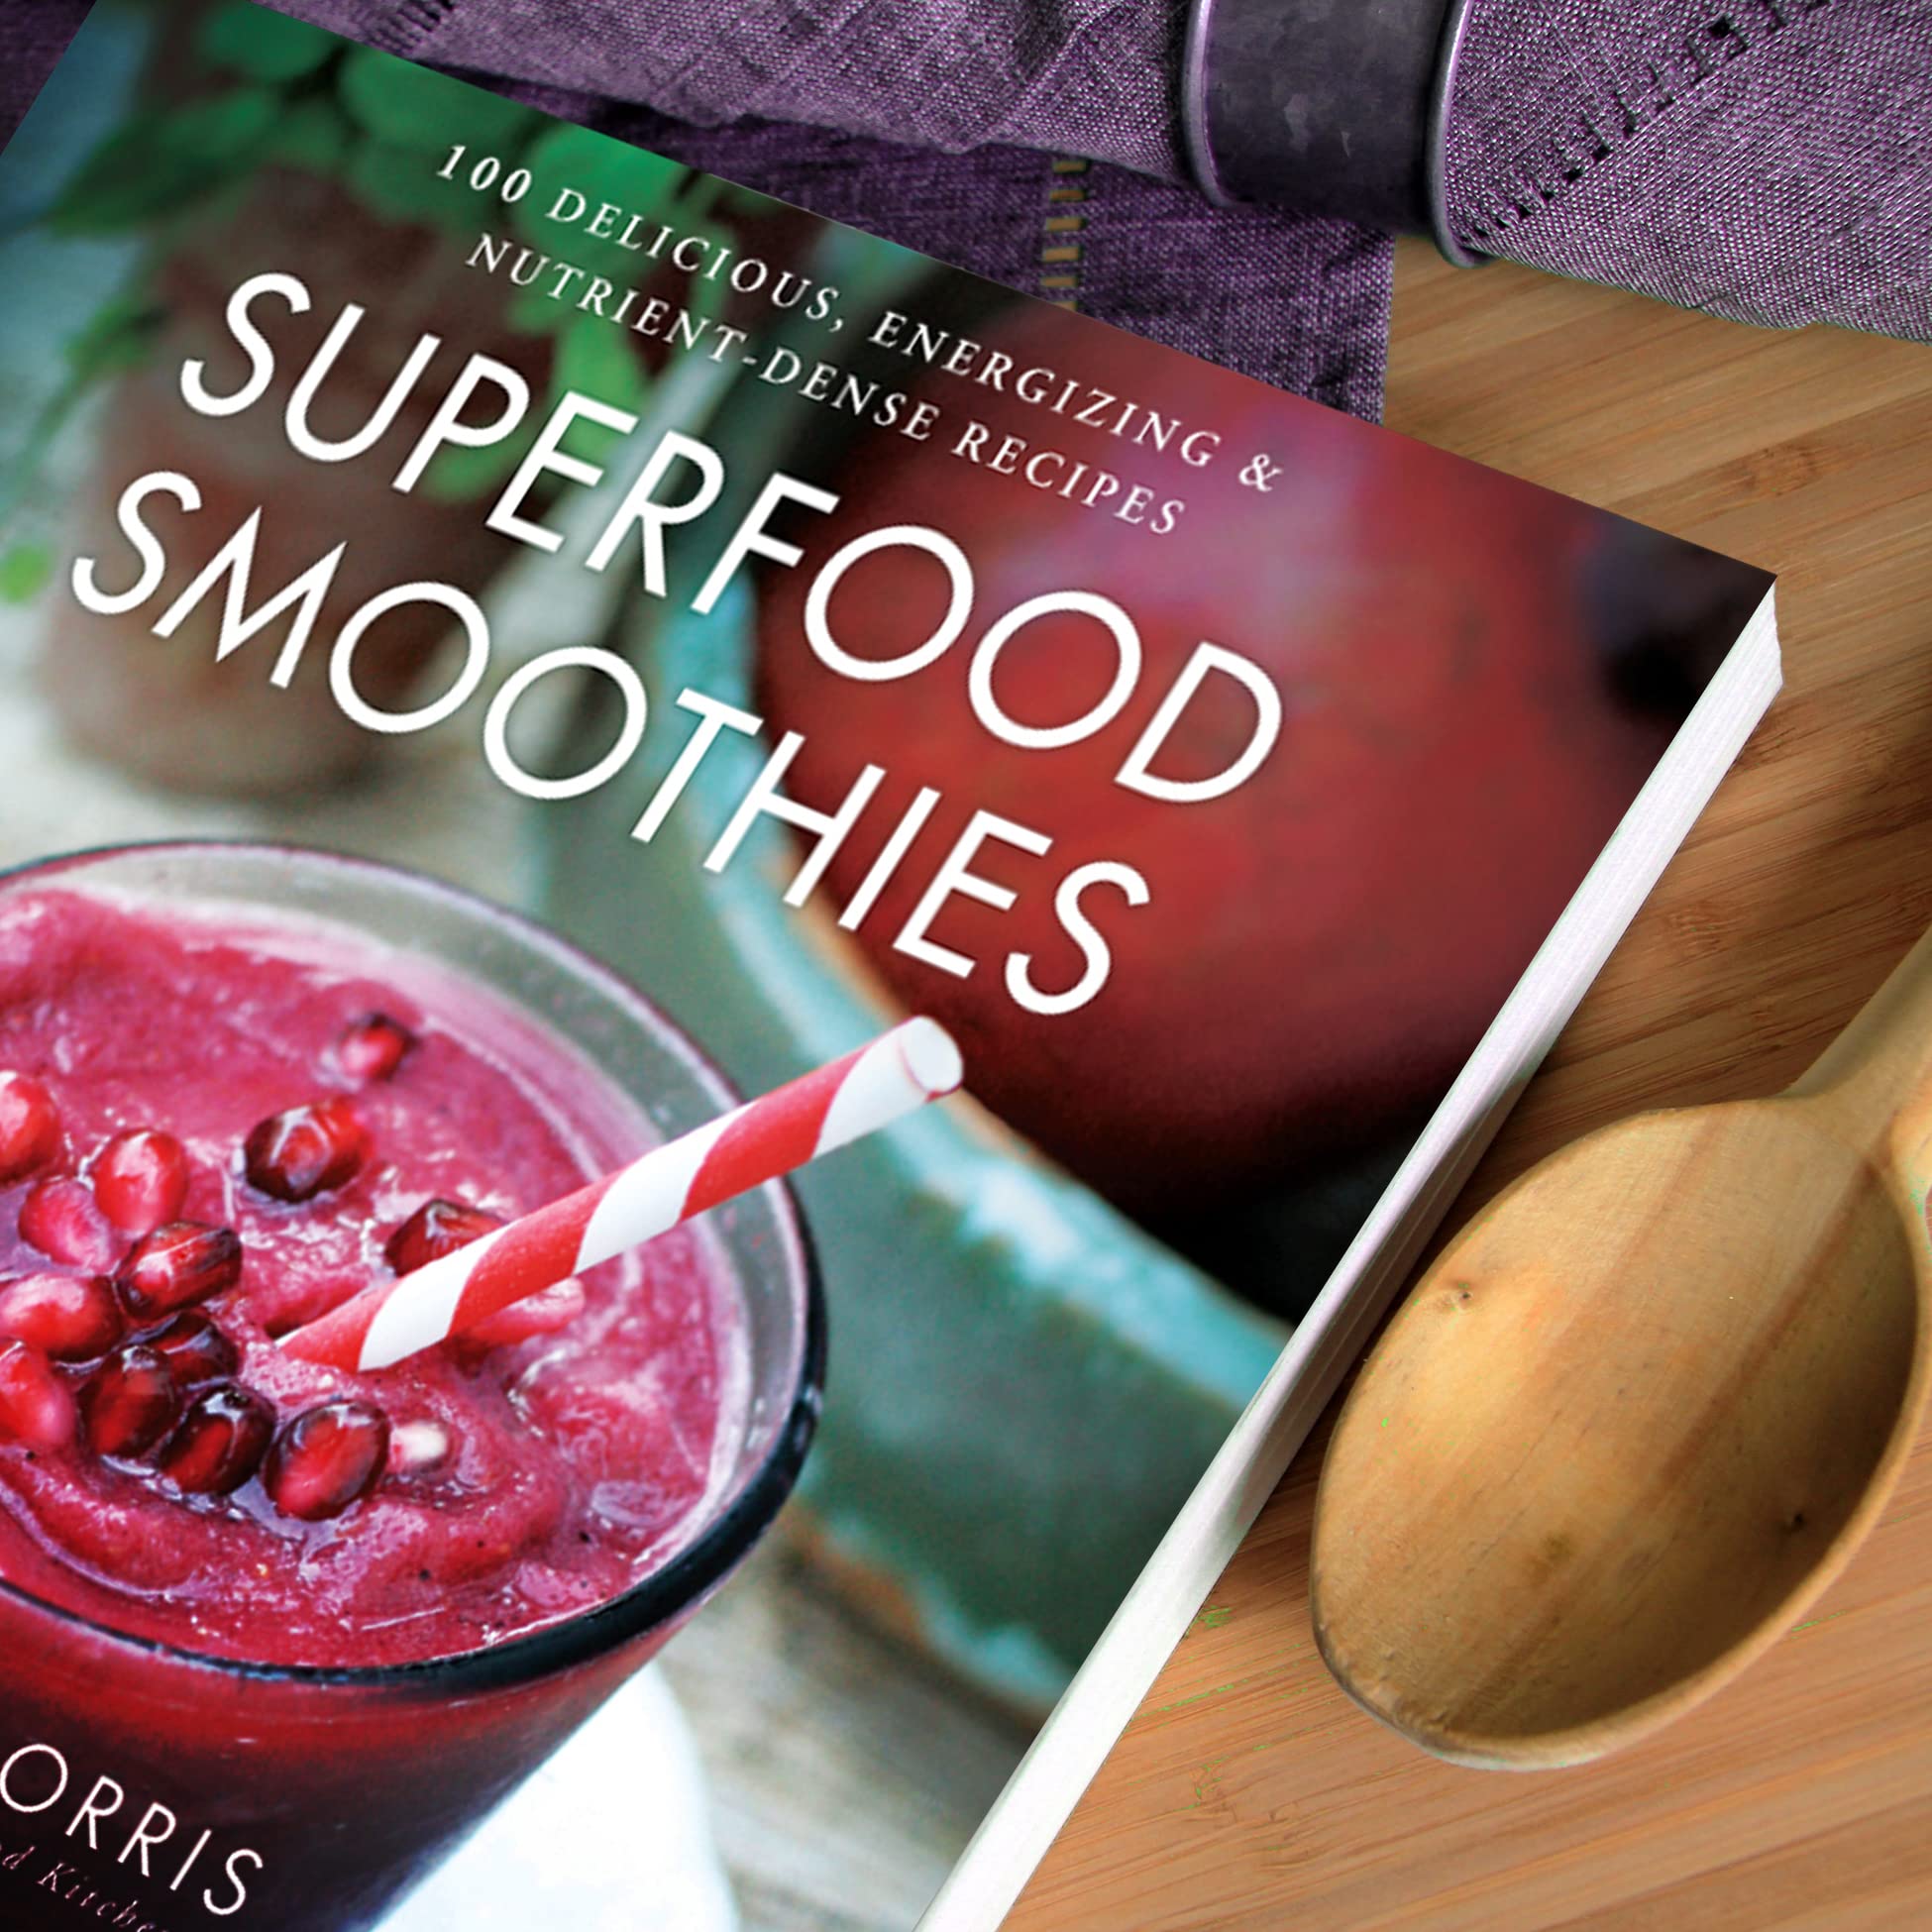 Superfood Smoothies: 100 Delicious, Energizing & Nutrient-dense Recipes - A Cookbook (Volume 2) (Julie Morris's Superfoods)